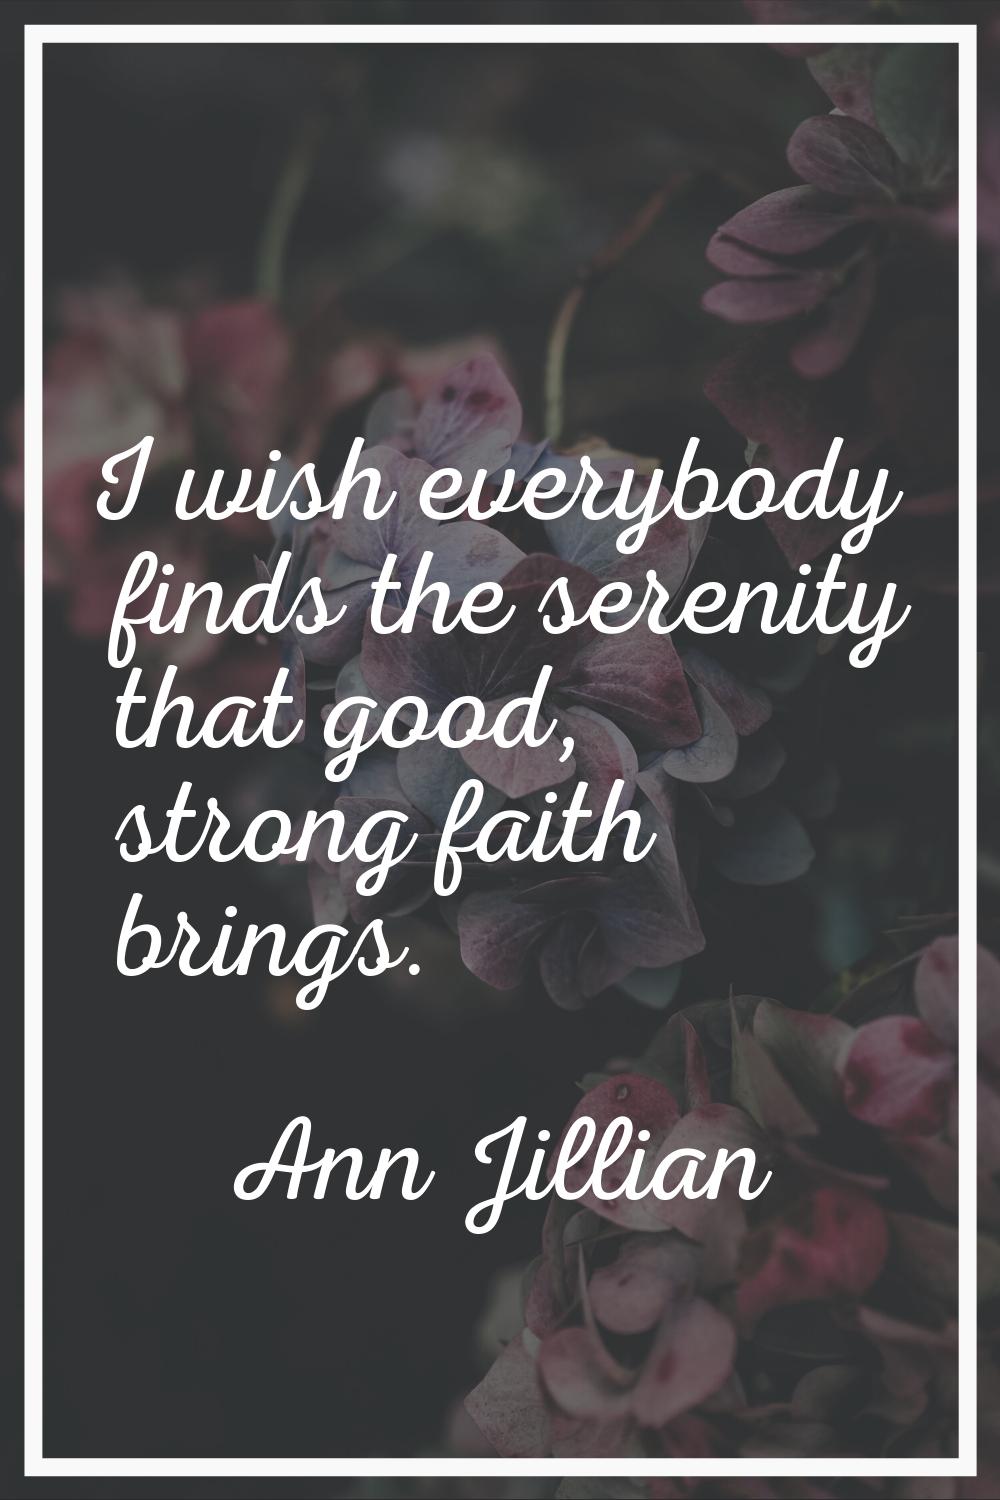 I wish everybody finds the serenity that good, strong faith brings.